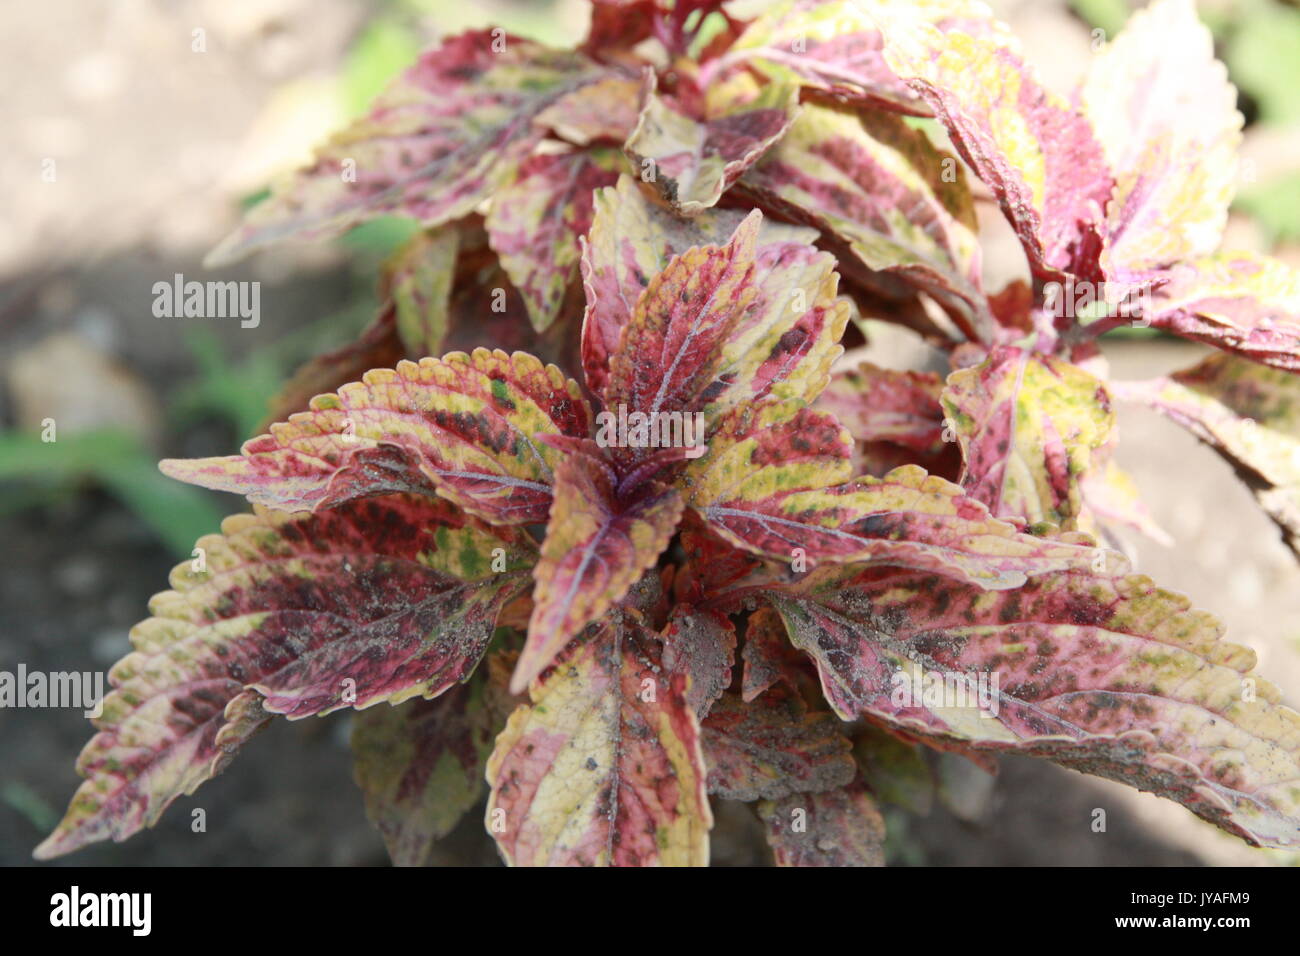 Pink leaf show peace plant photography in backyard garden. Stock Photo